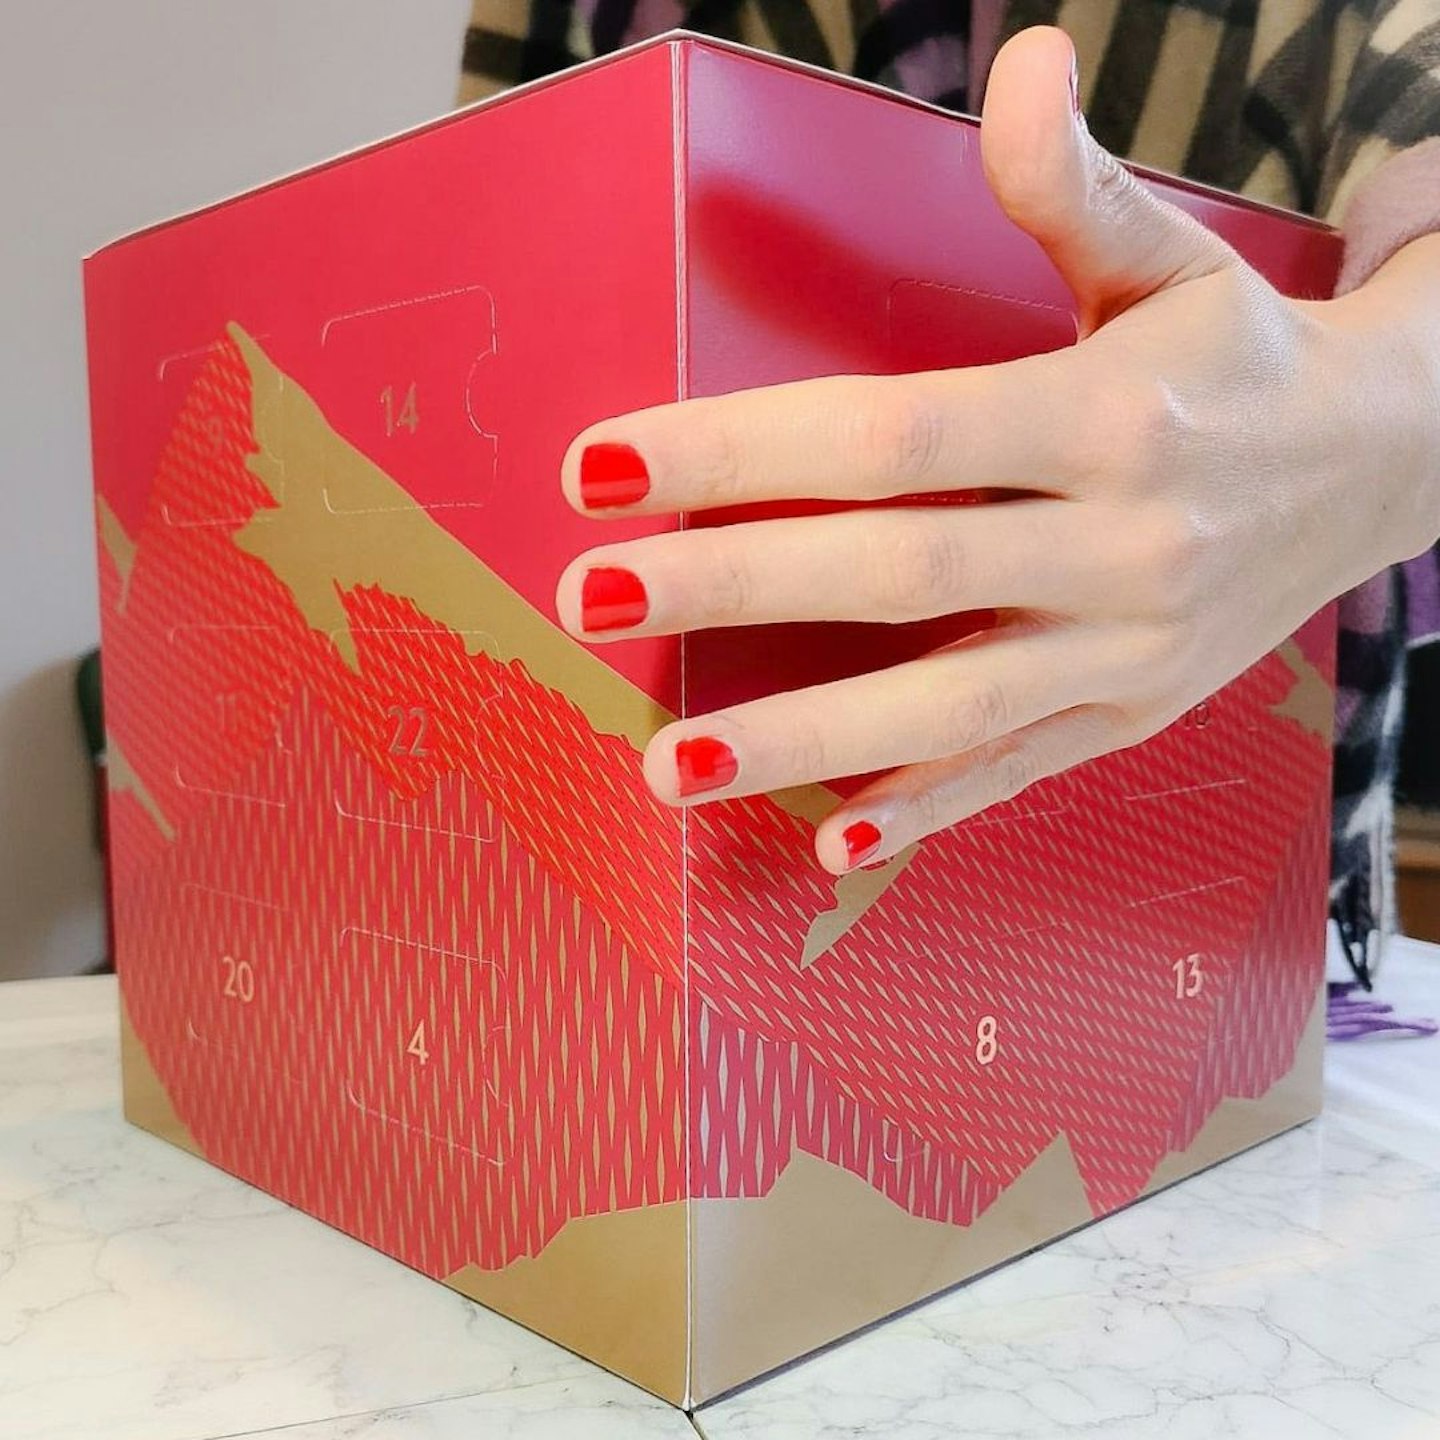 Showing the cube shape of the Nespresso Vertuo Advent Calendar